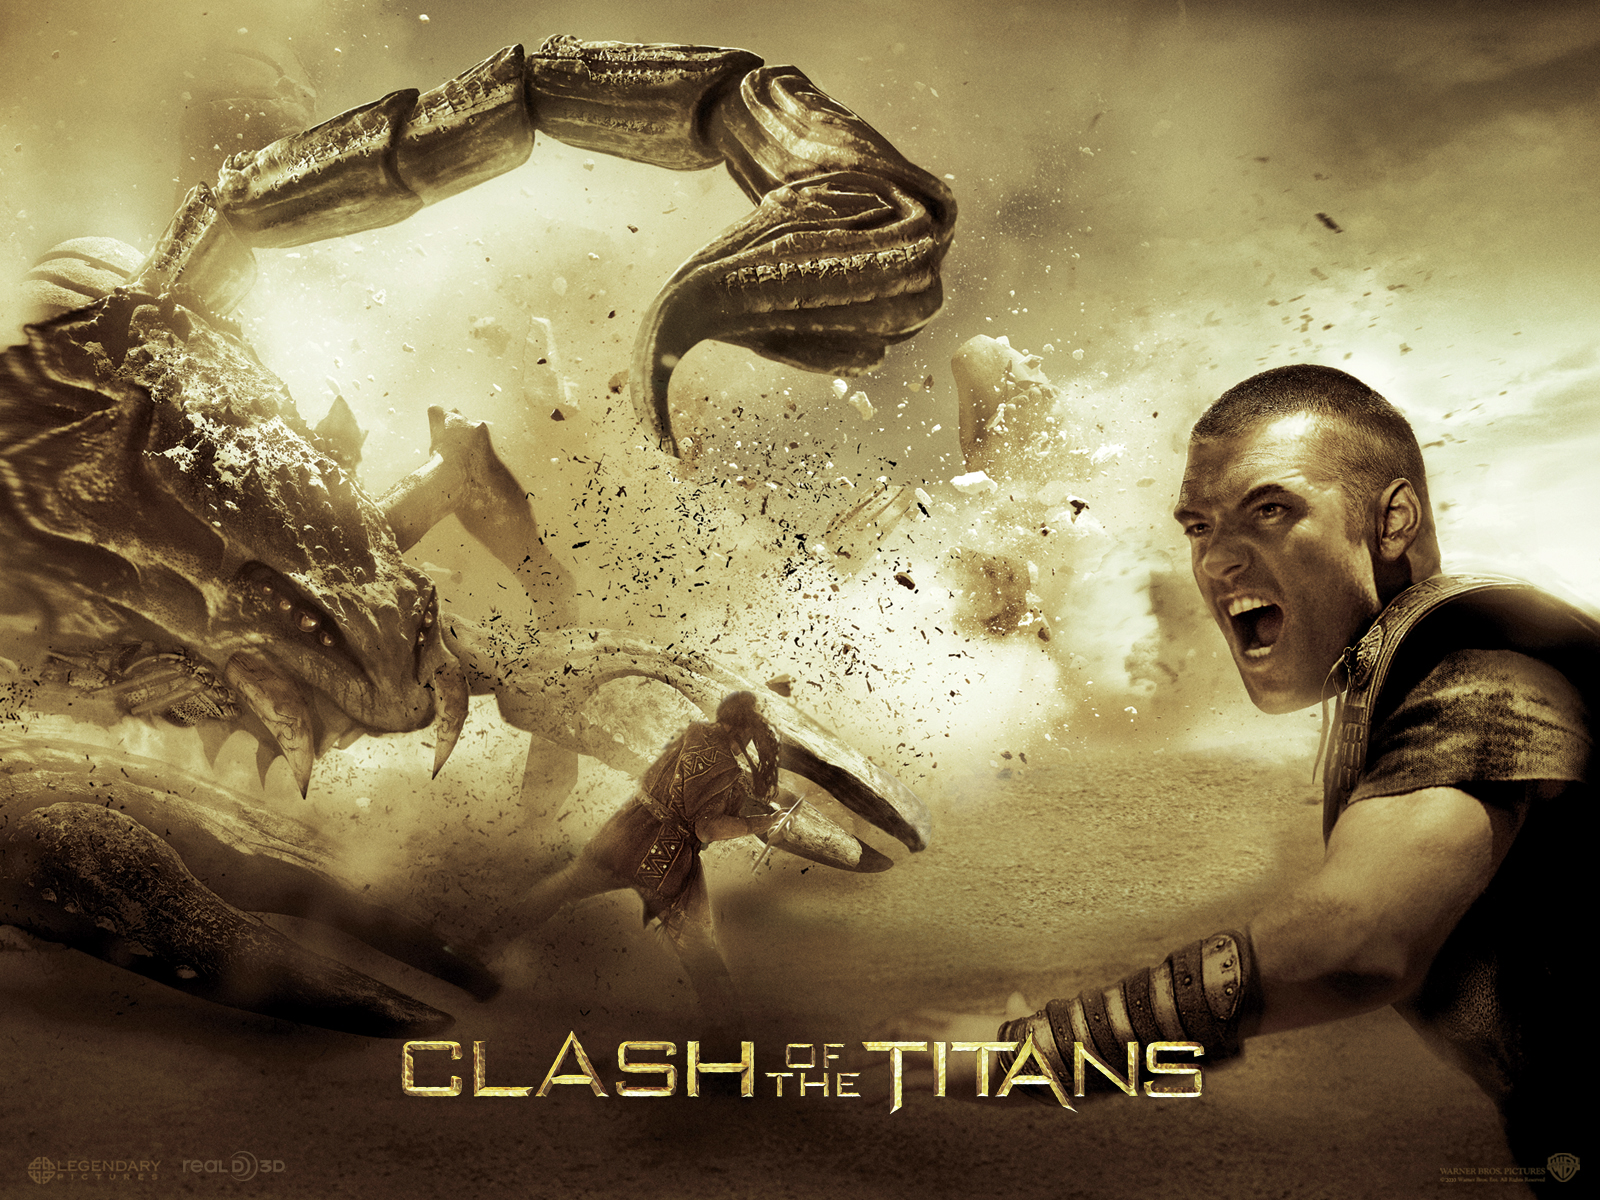 Download full size Clash Of The Titans wallpaper / Movies / 1600x1200